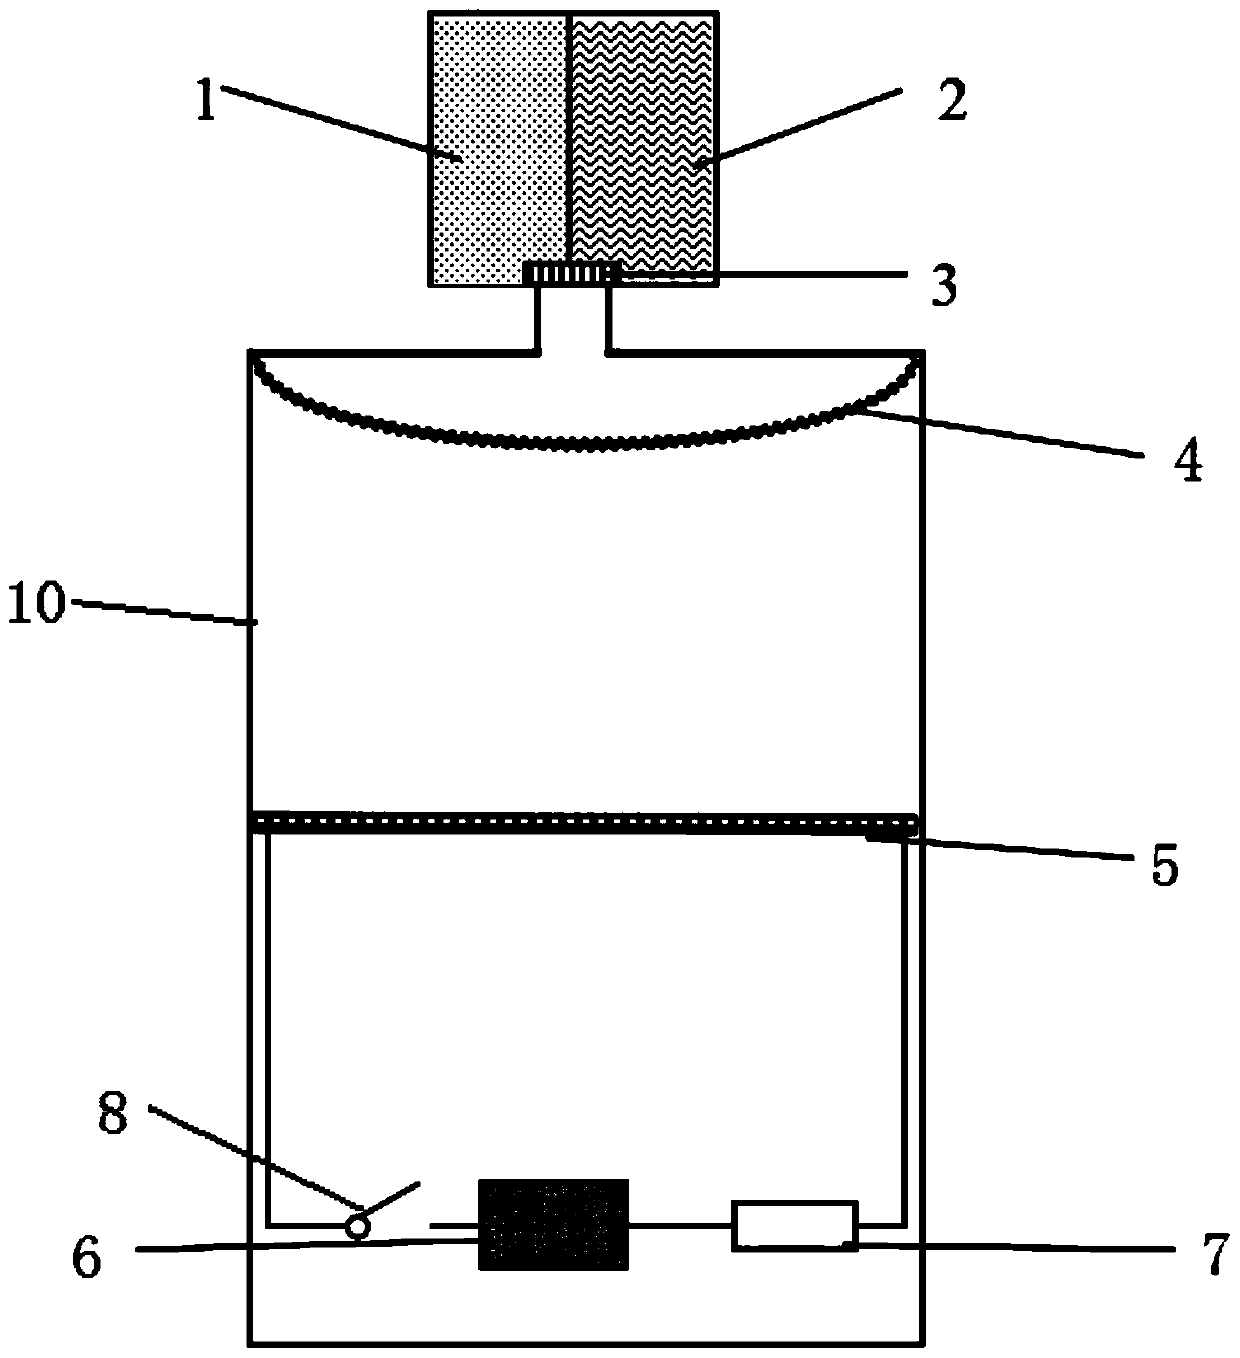 PM2.5 concentration measurement device and method based on non-woven fabric resistance method